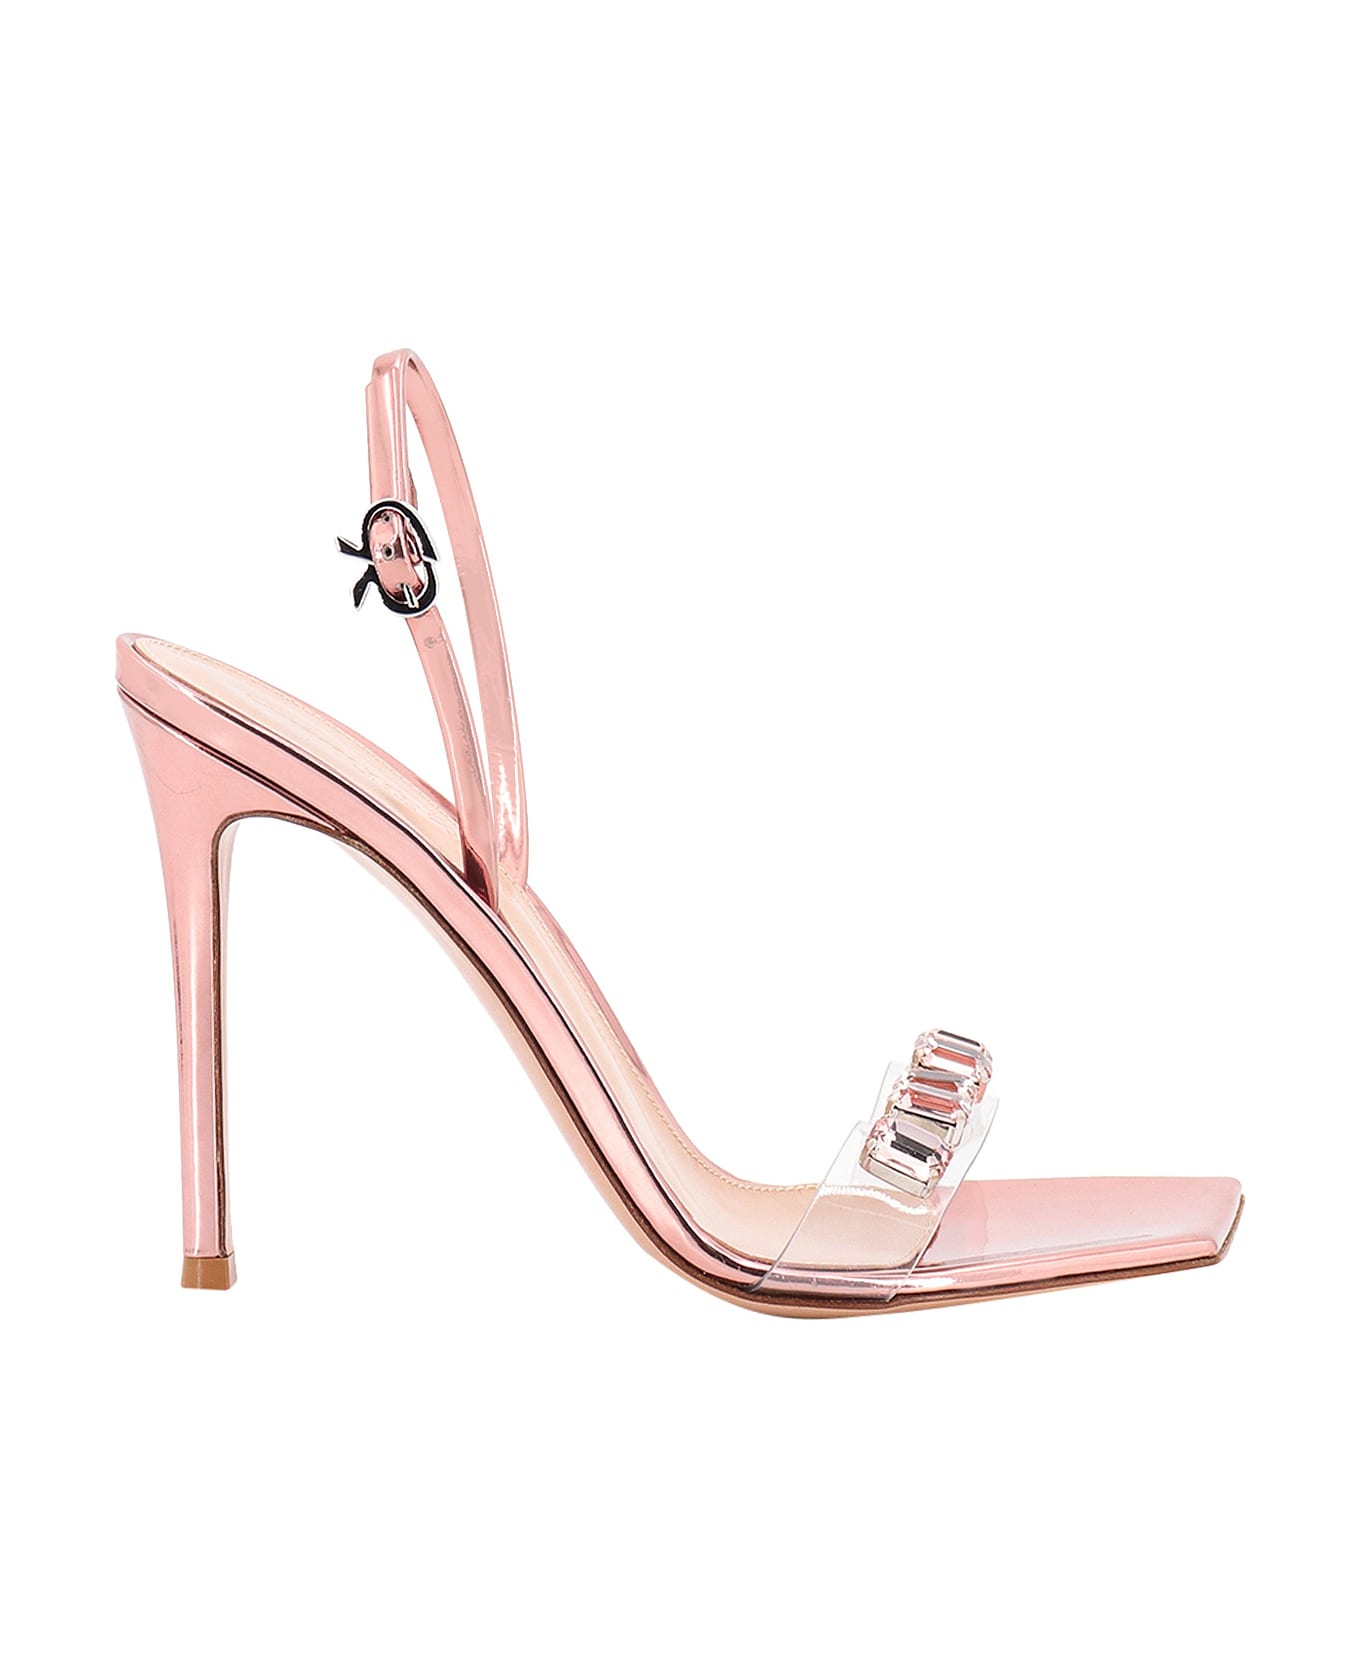 Gianvito Rossi Ribbon Candy Sandals - Pink